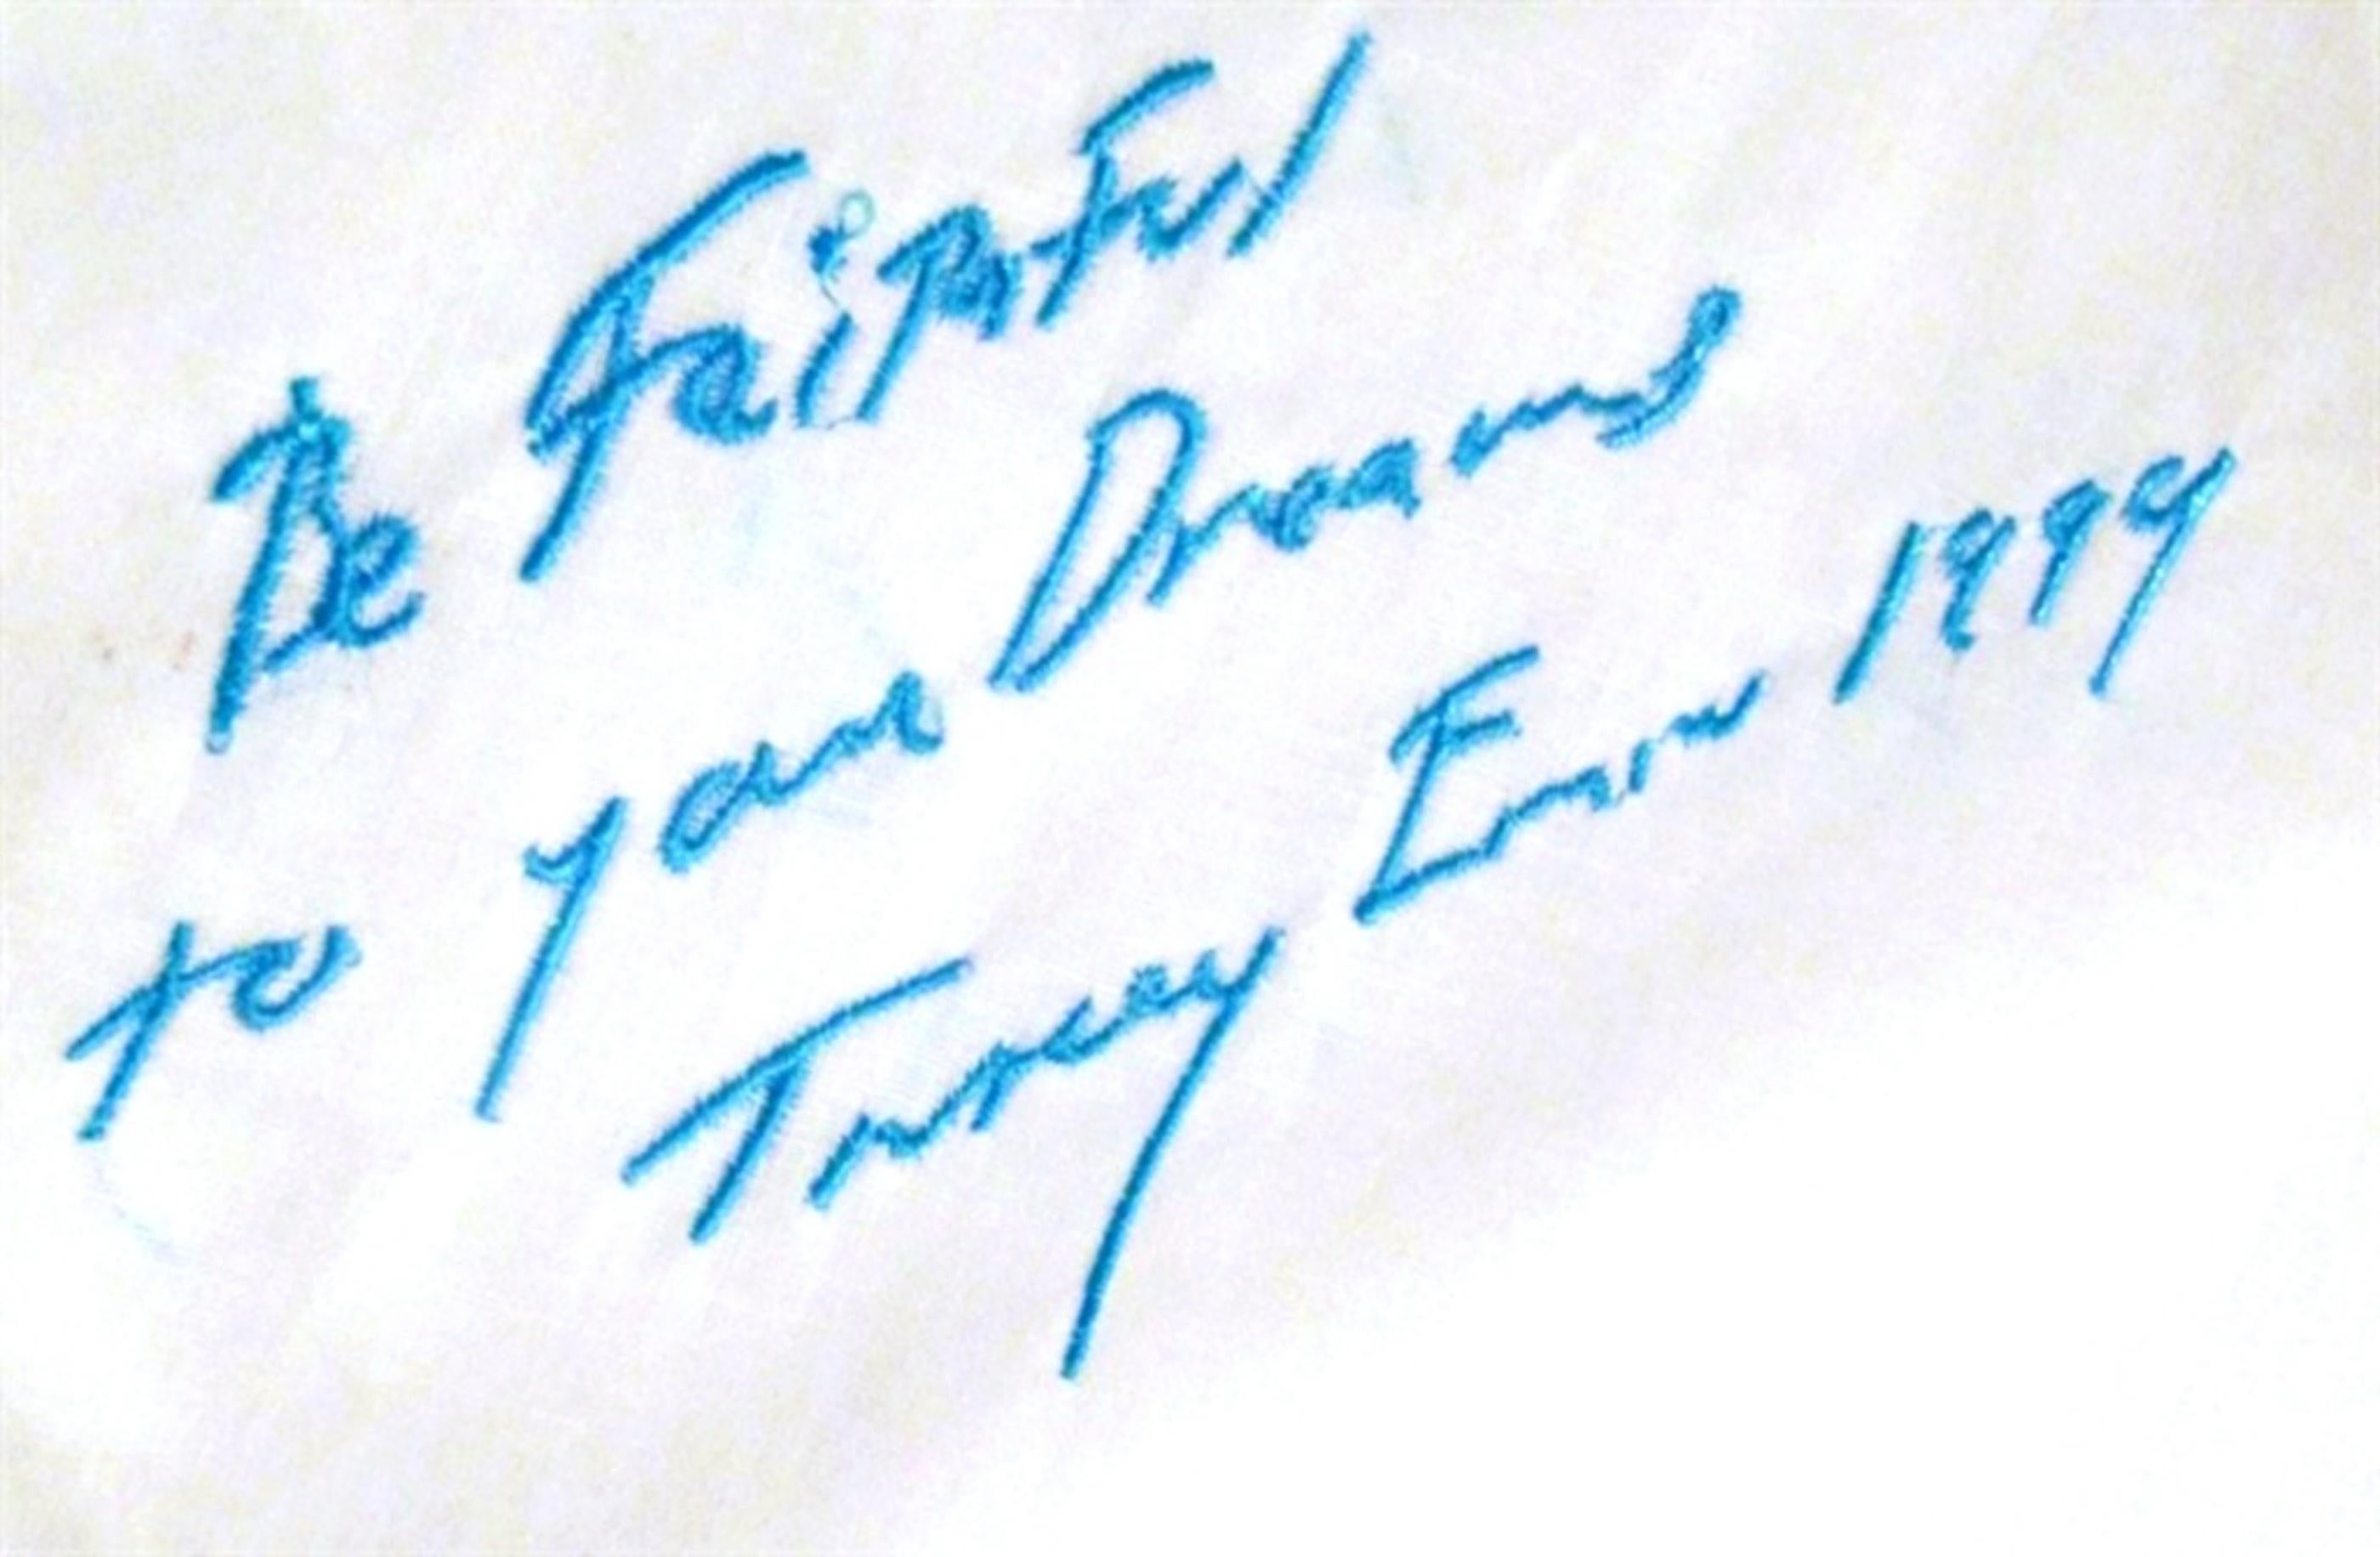 Be Faithful To Your Dreams (Limited Edition Embroidered Cotton Handkerchief) - Mixed Media Art by Tracey Emin